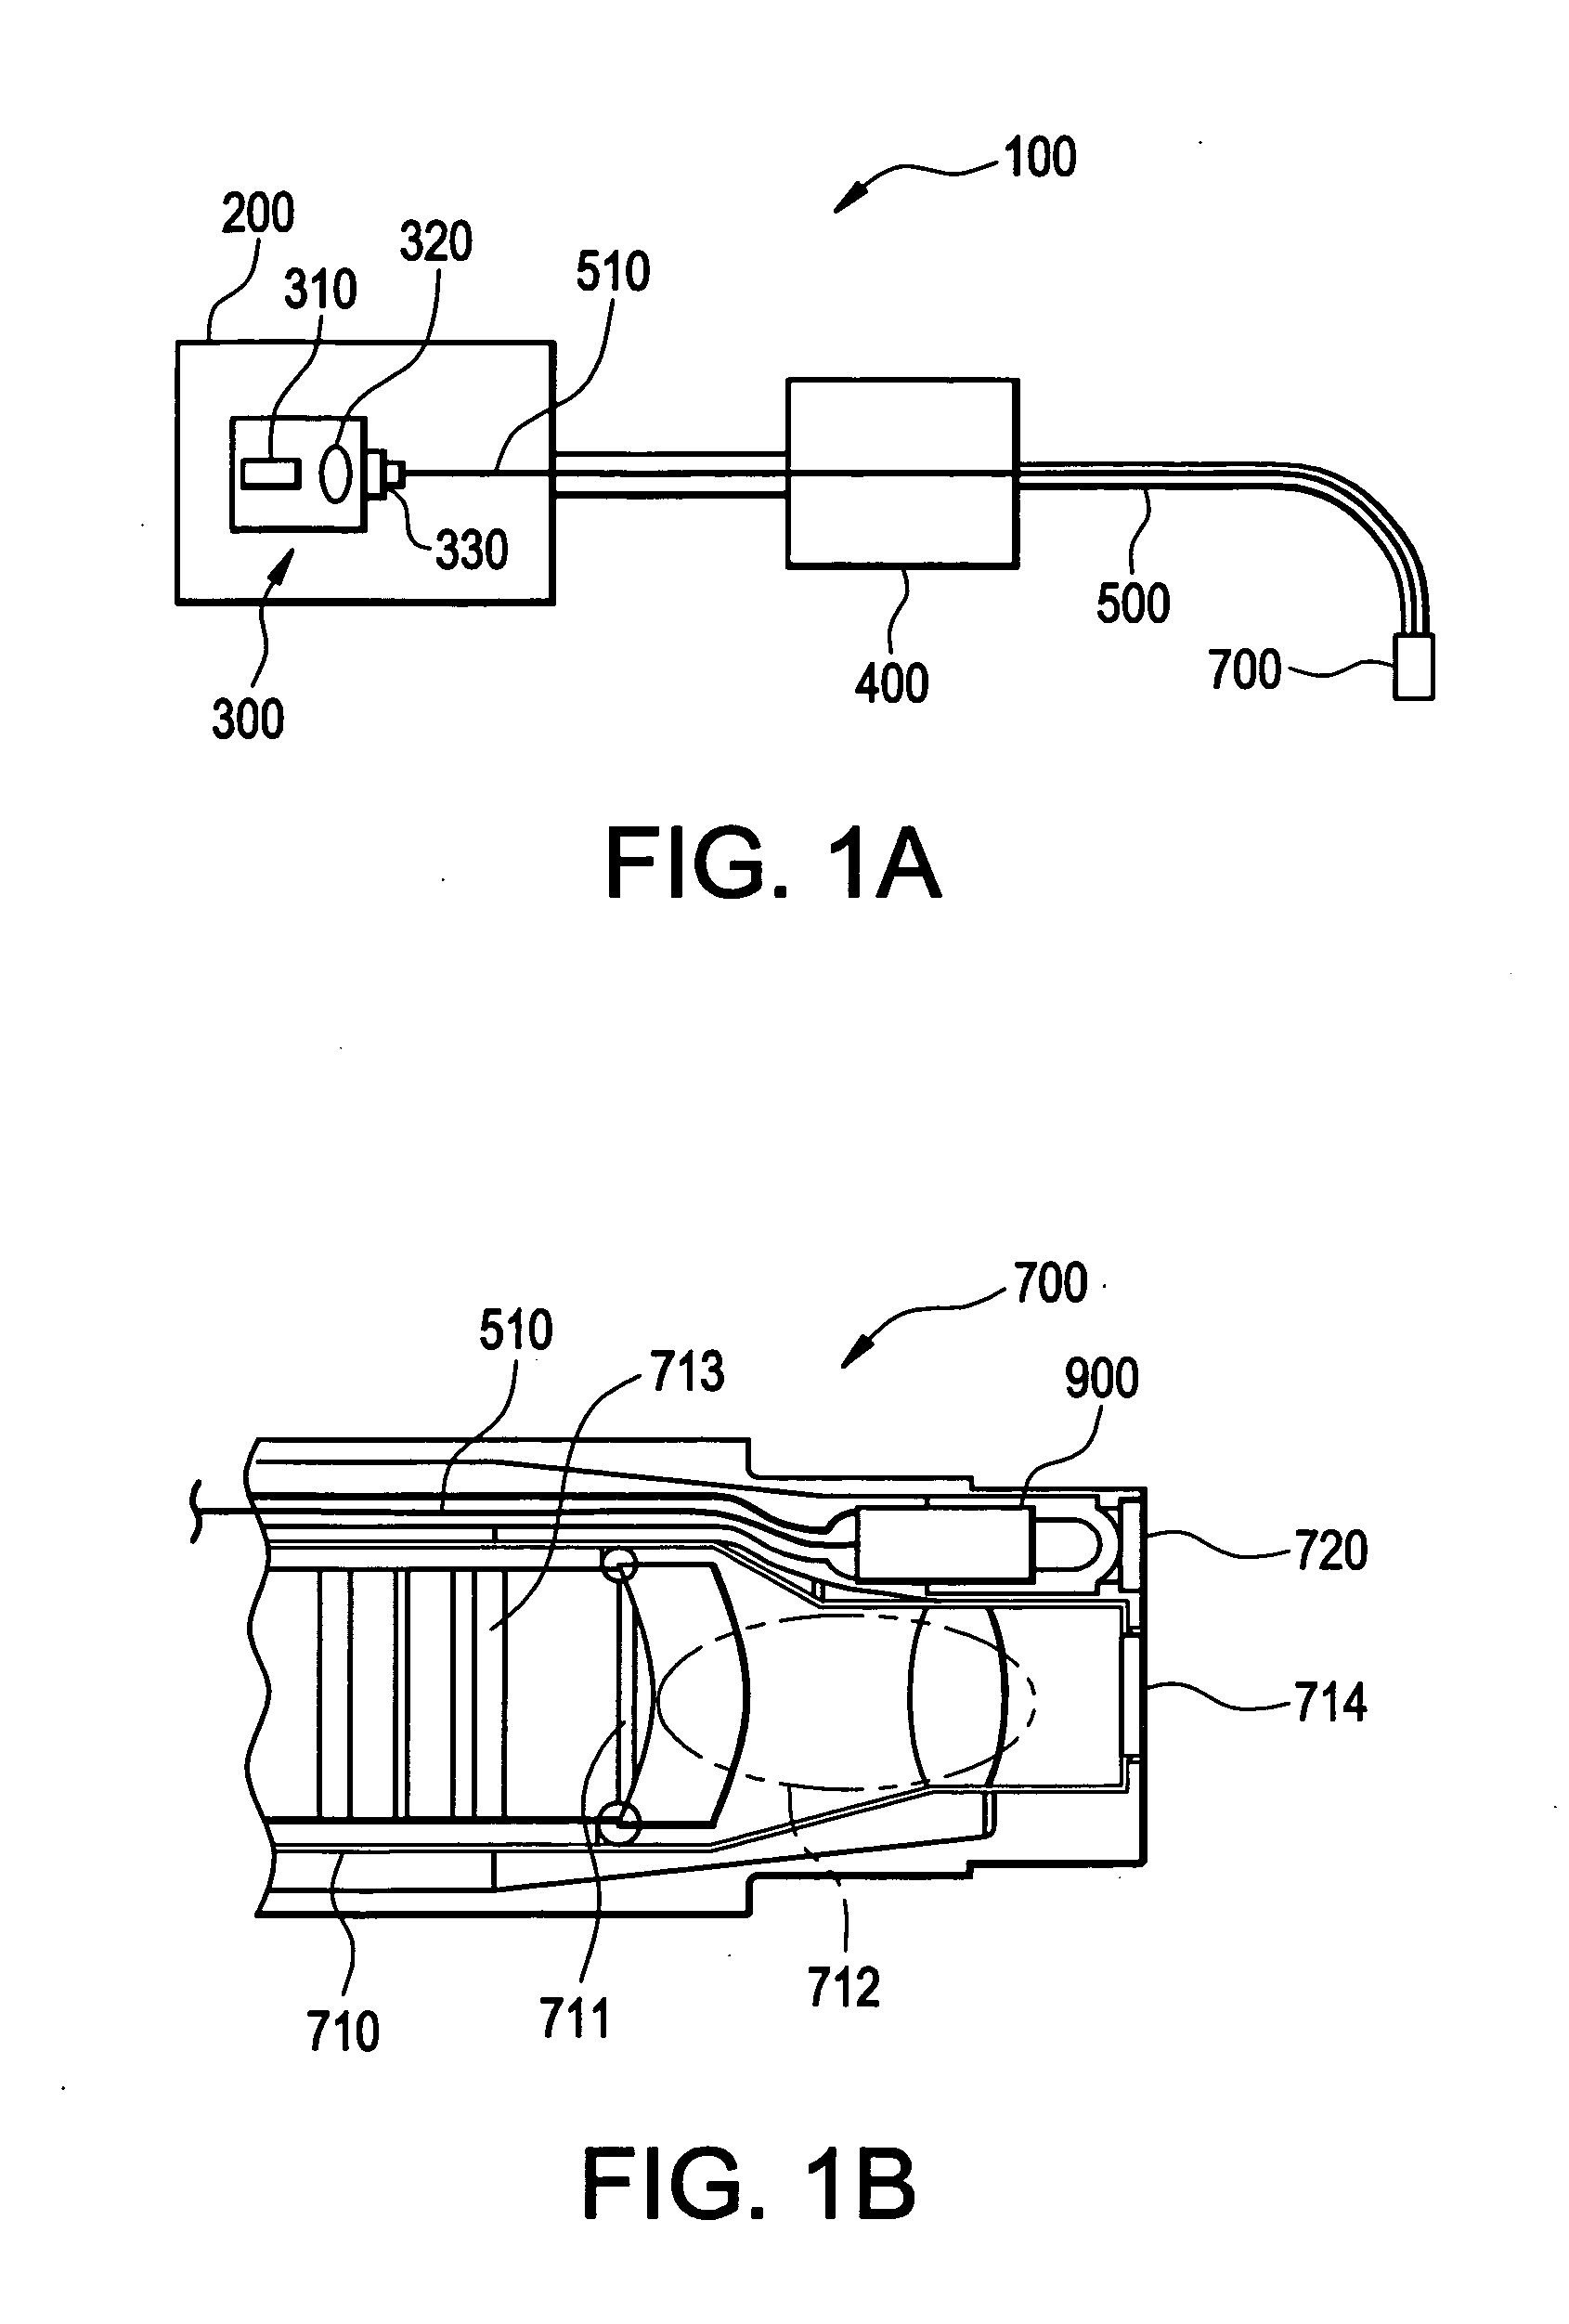 Light assembly for remote visual inspection apparatus